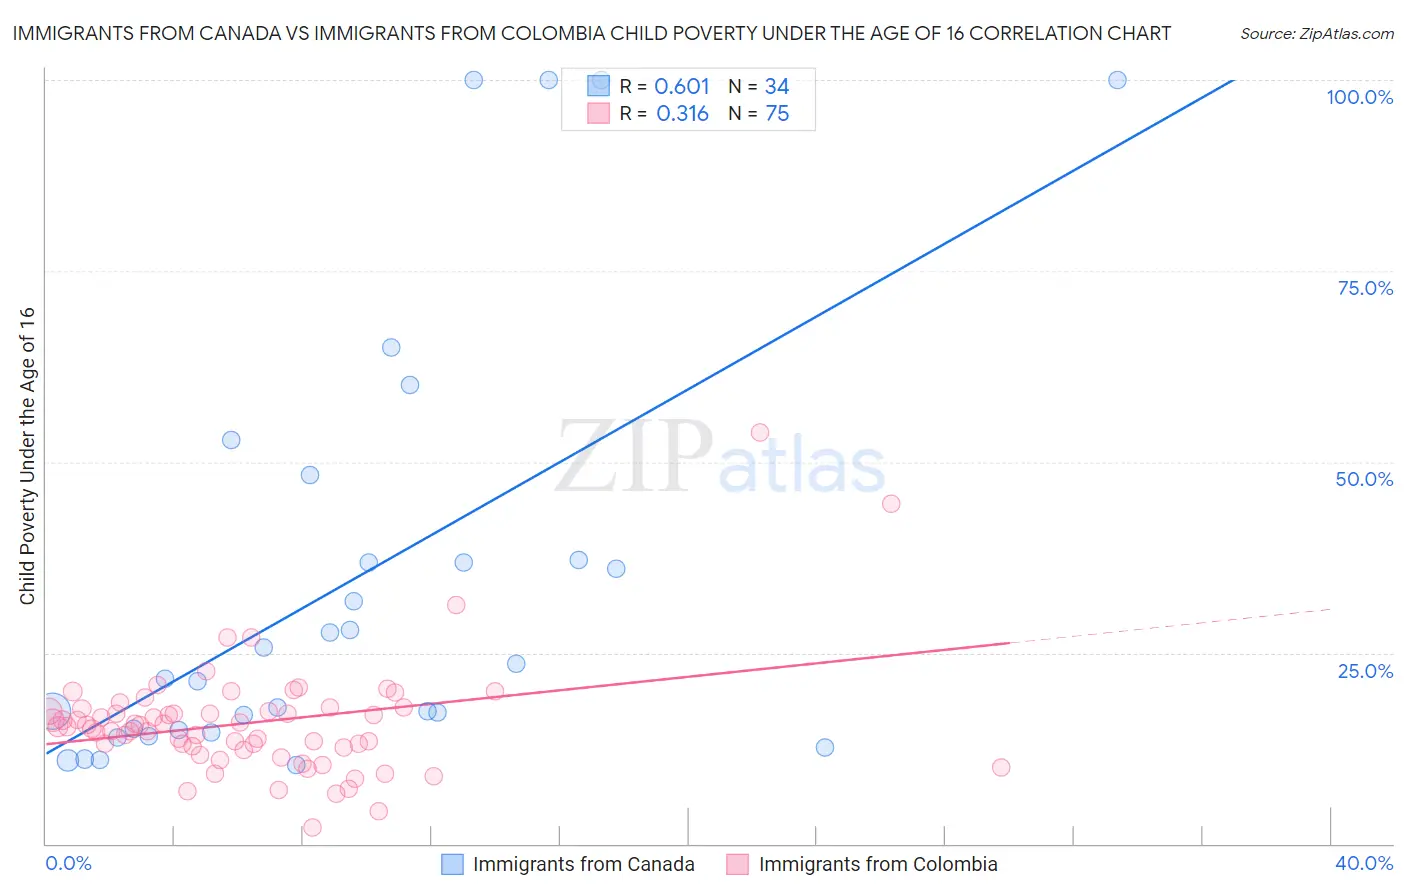 Immigrants from Canada vs Immigrants from Colombia Child Poverty Under the Age of 16